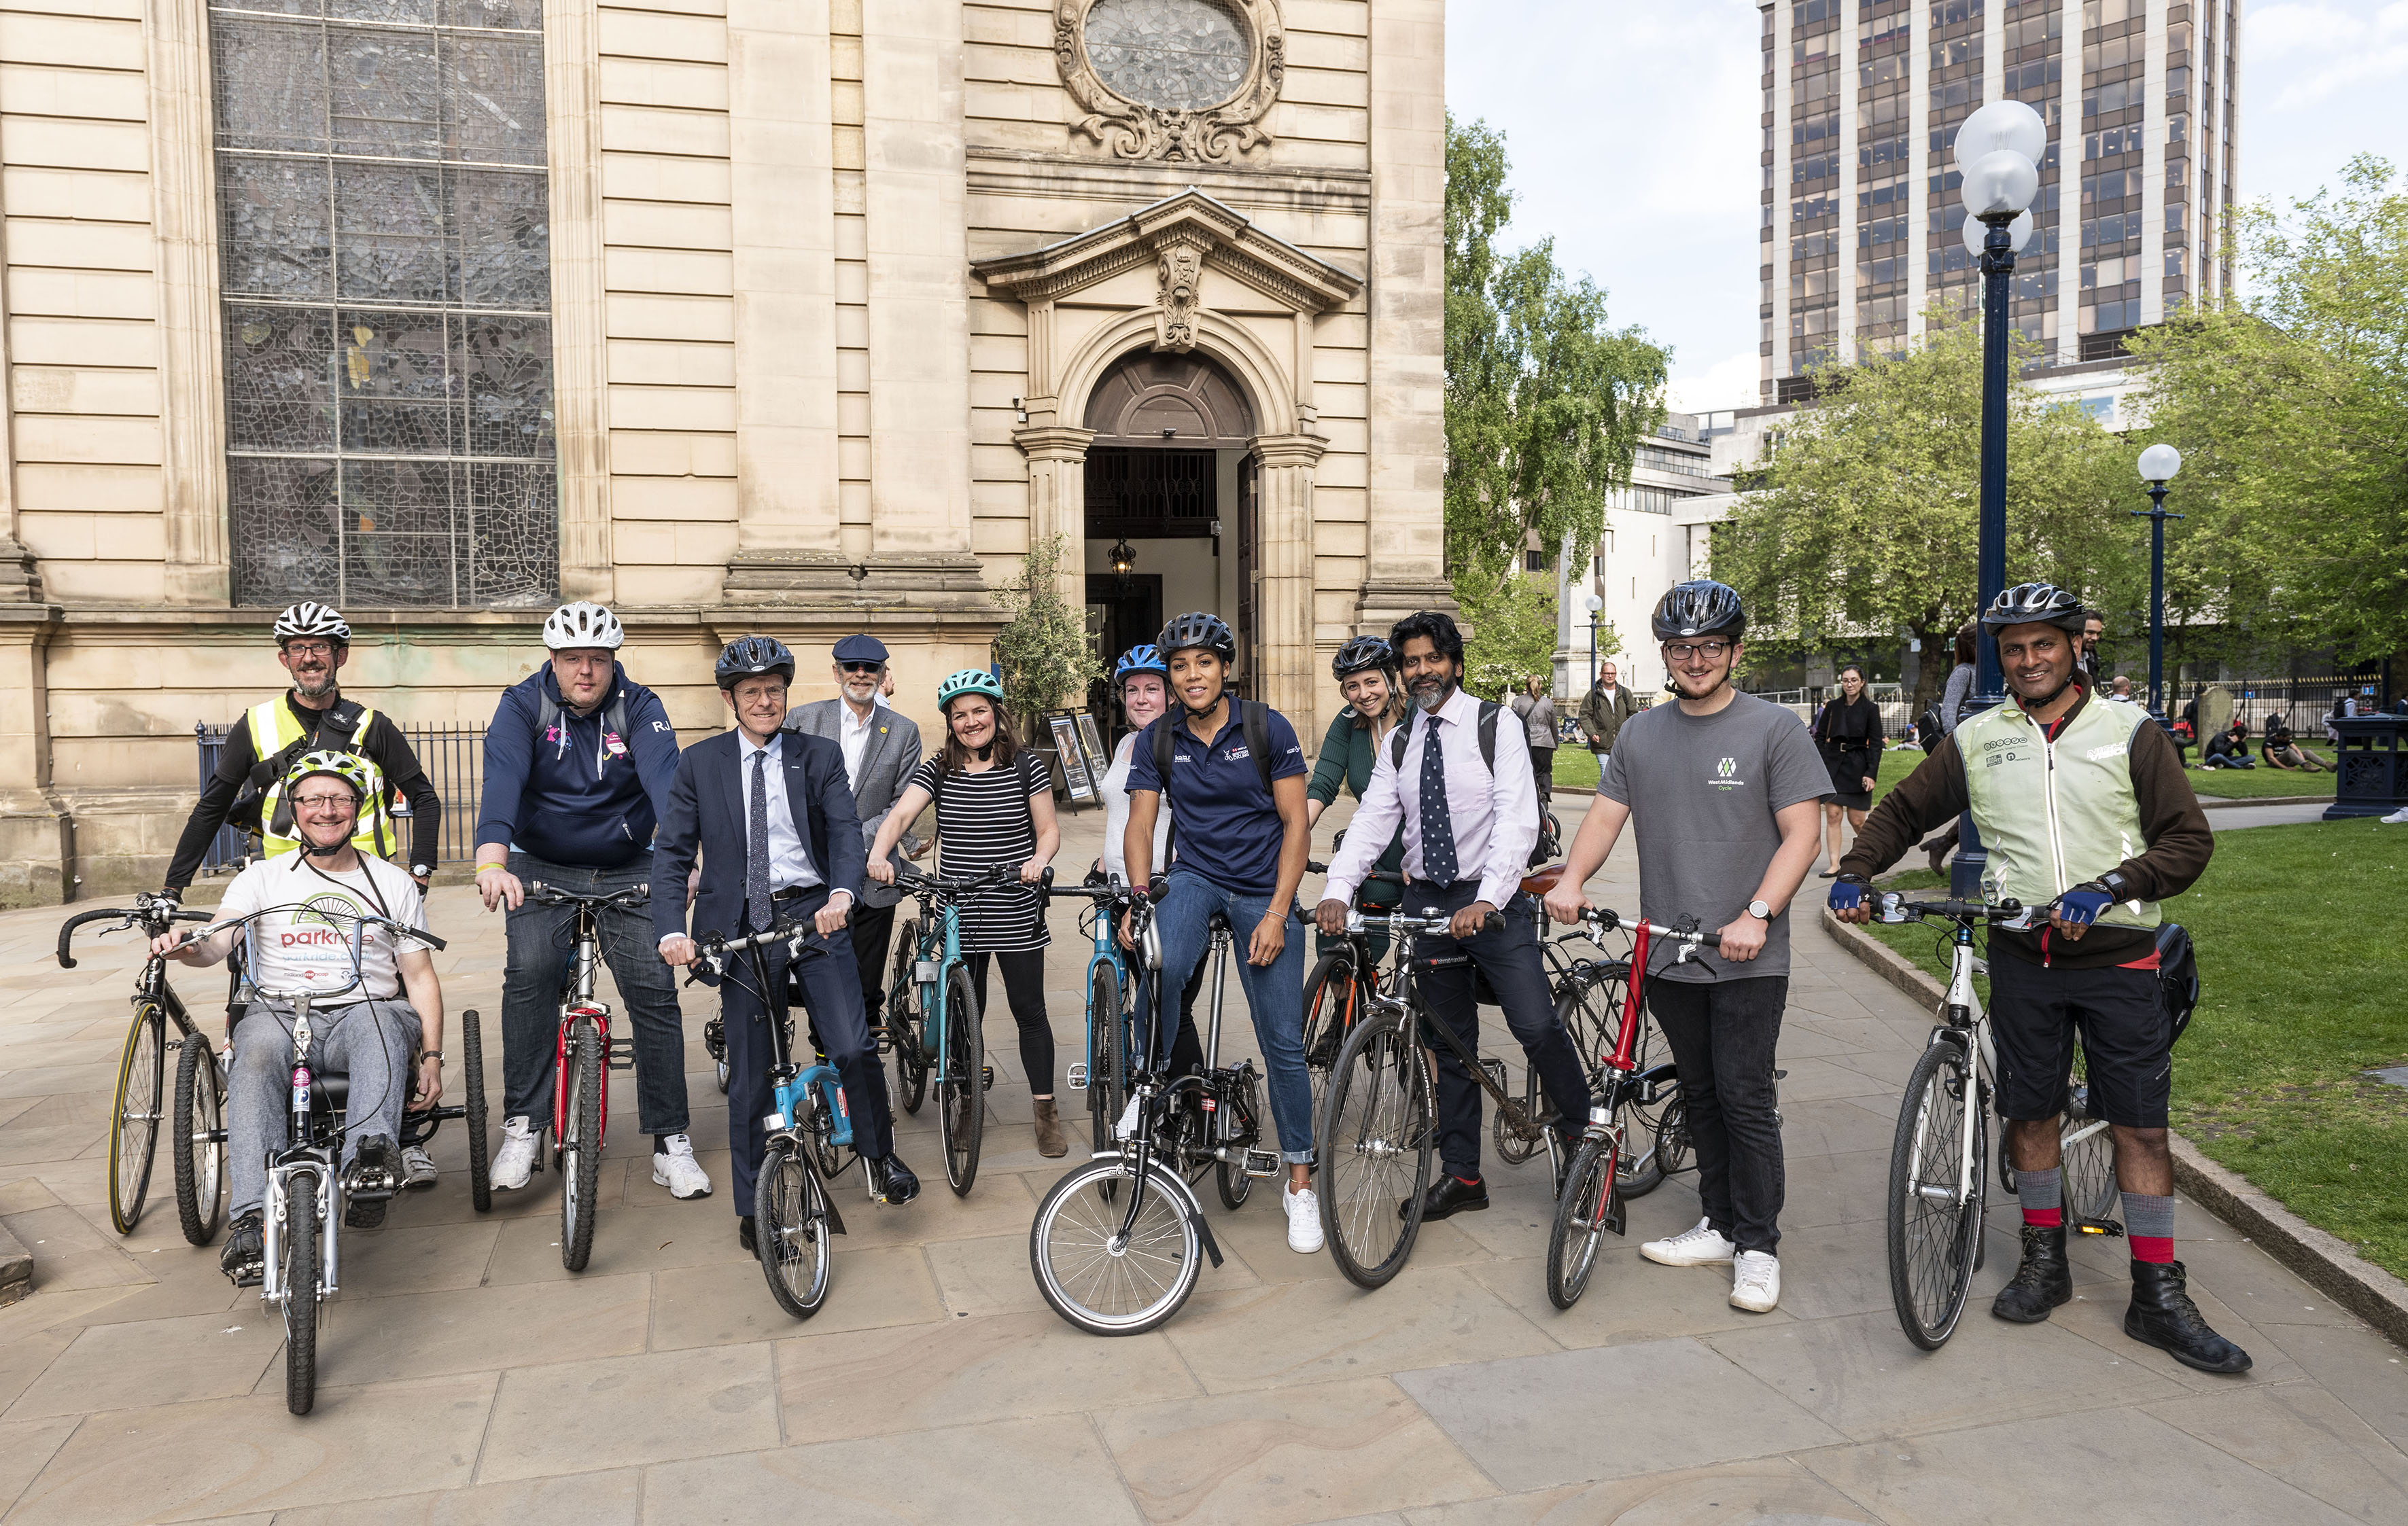 New £2 million local fund announced at West Midlands’ first Cycling Summit